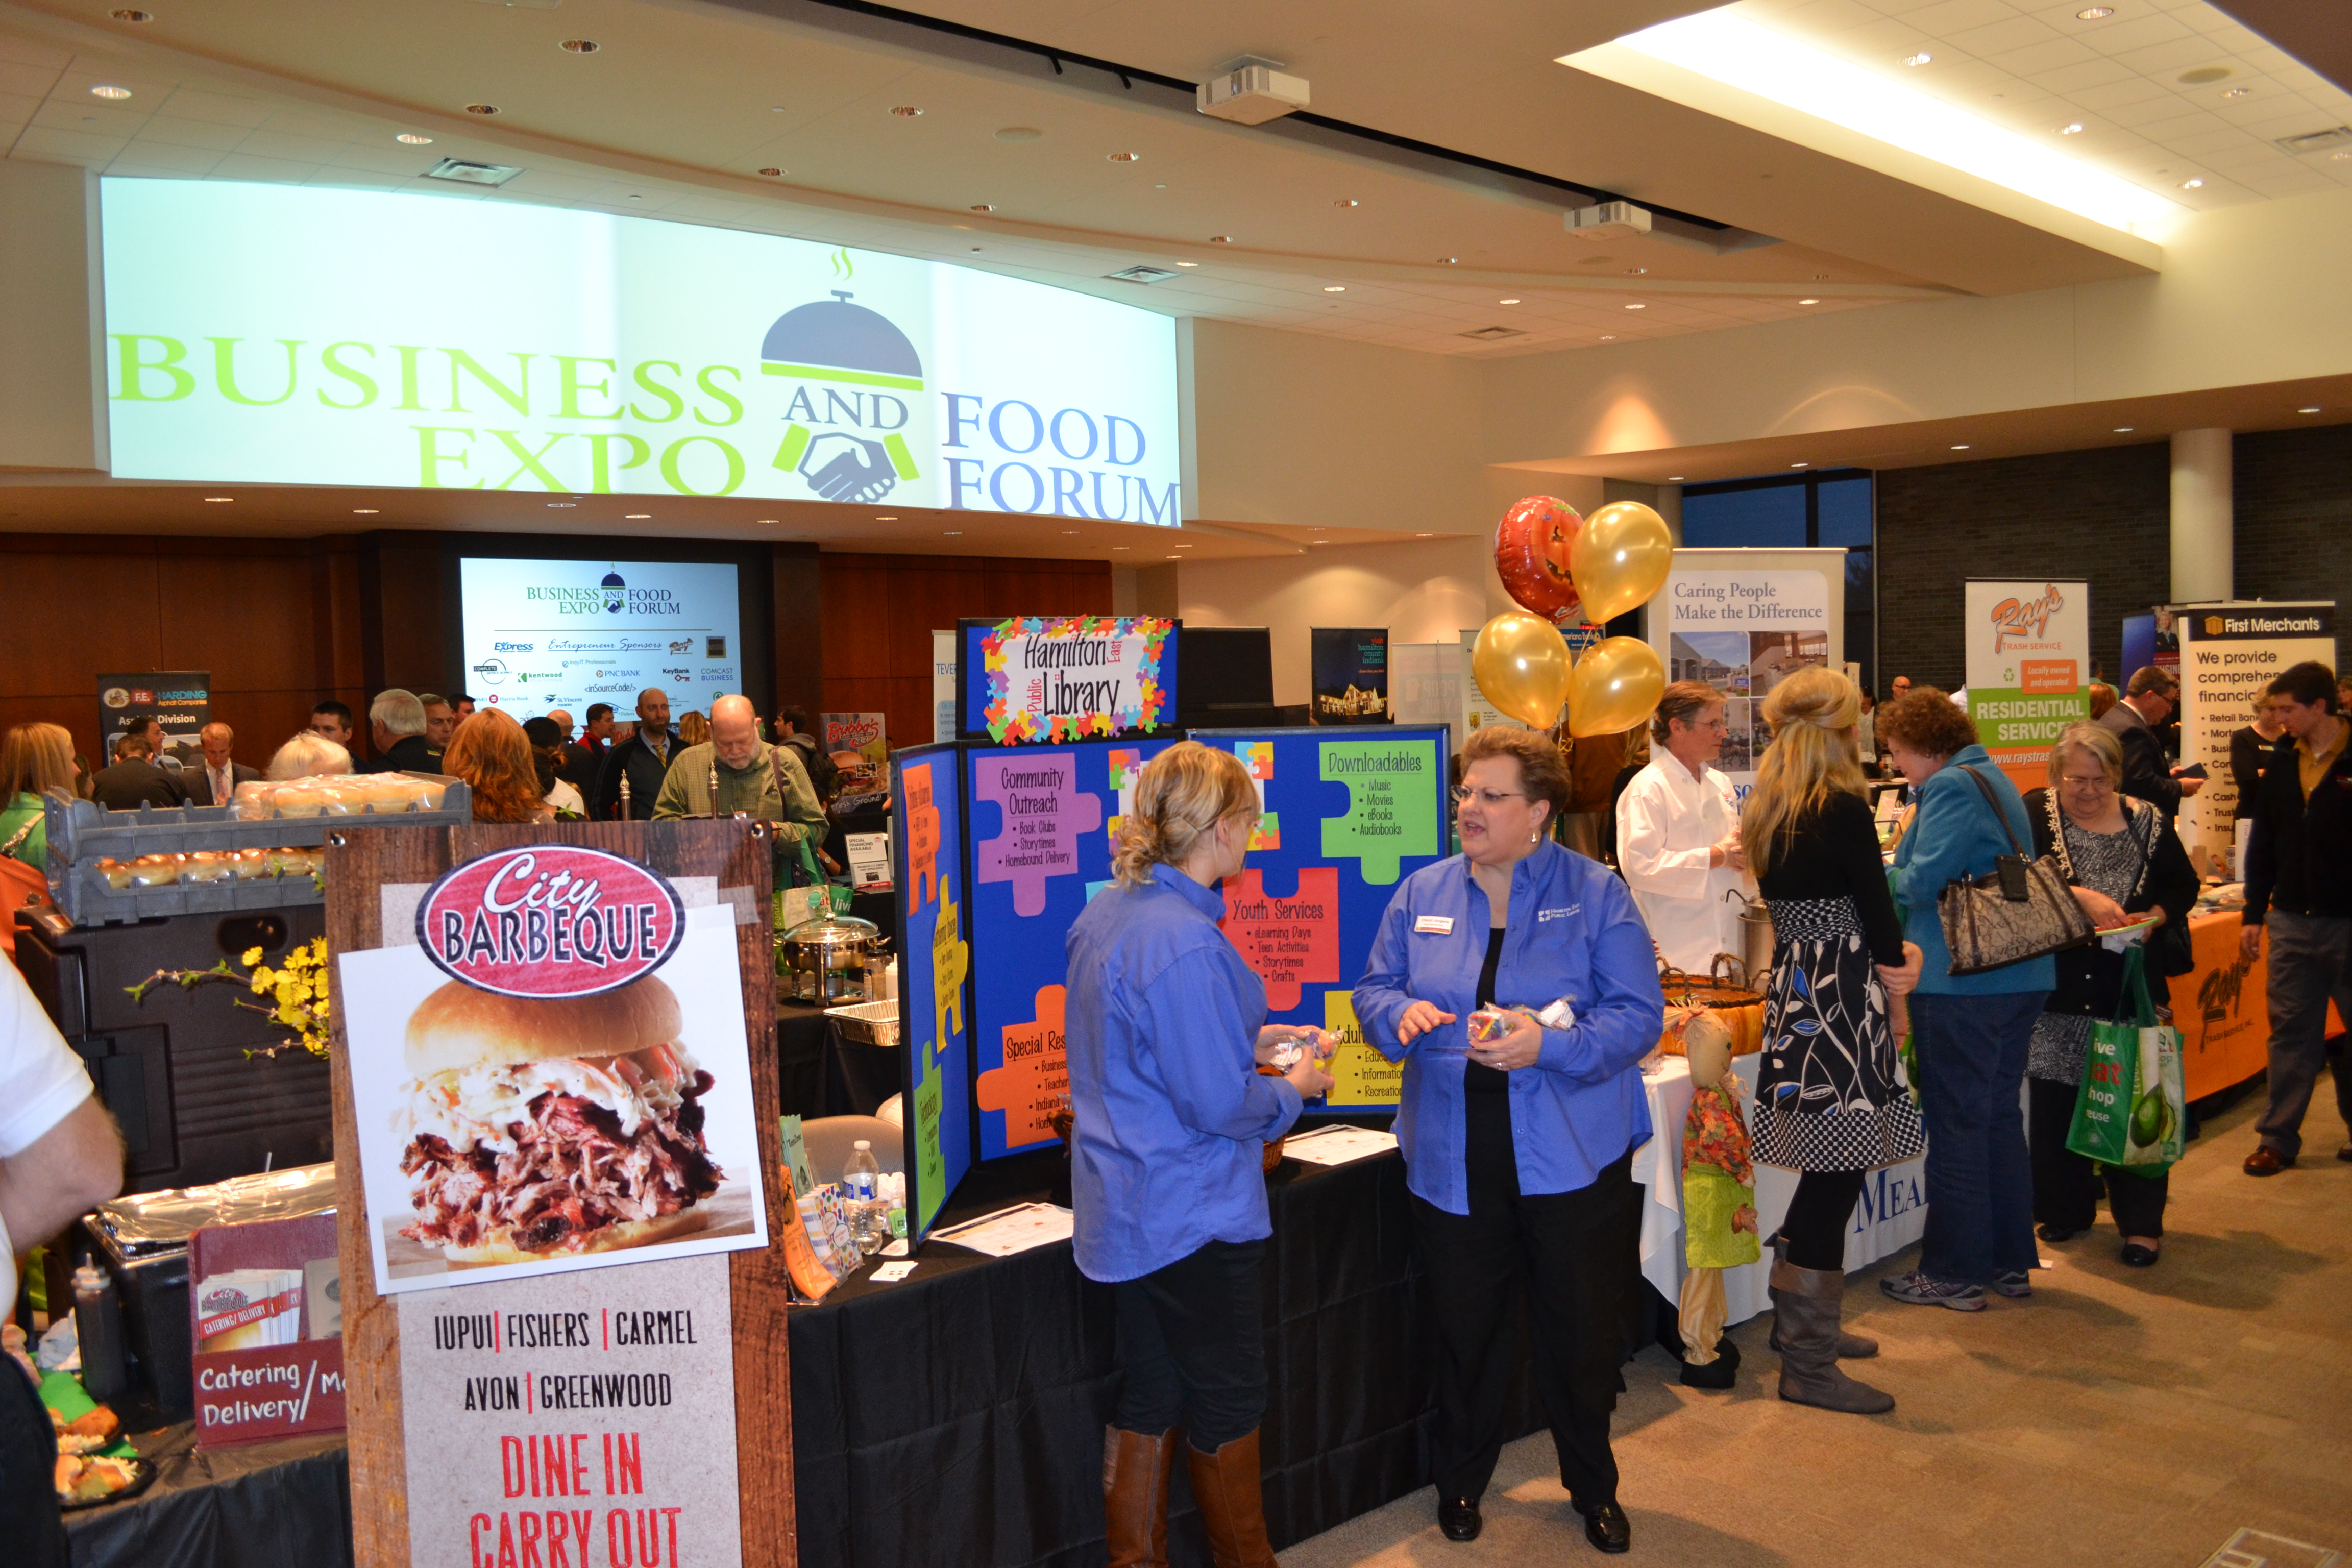 Approximately 500 people attended the second annual Business Expo and Food Forum hosted by the Fishers Chamber of Commerce at the Forum Credit Union Conference Center. (Photo by John Cinnamon)